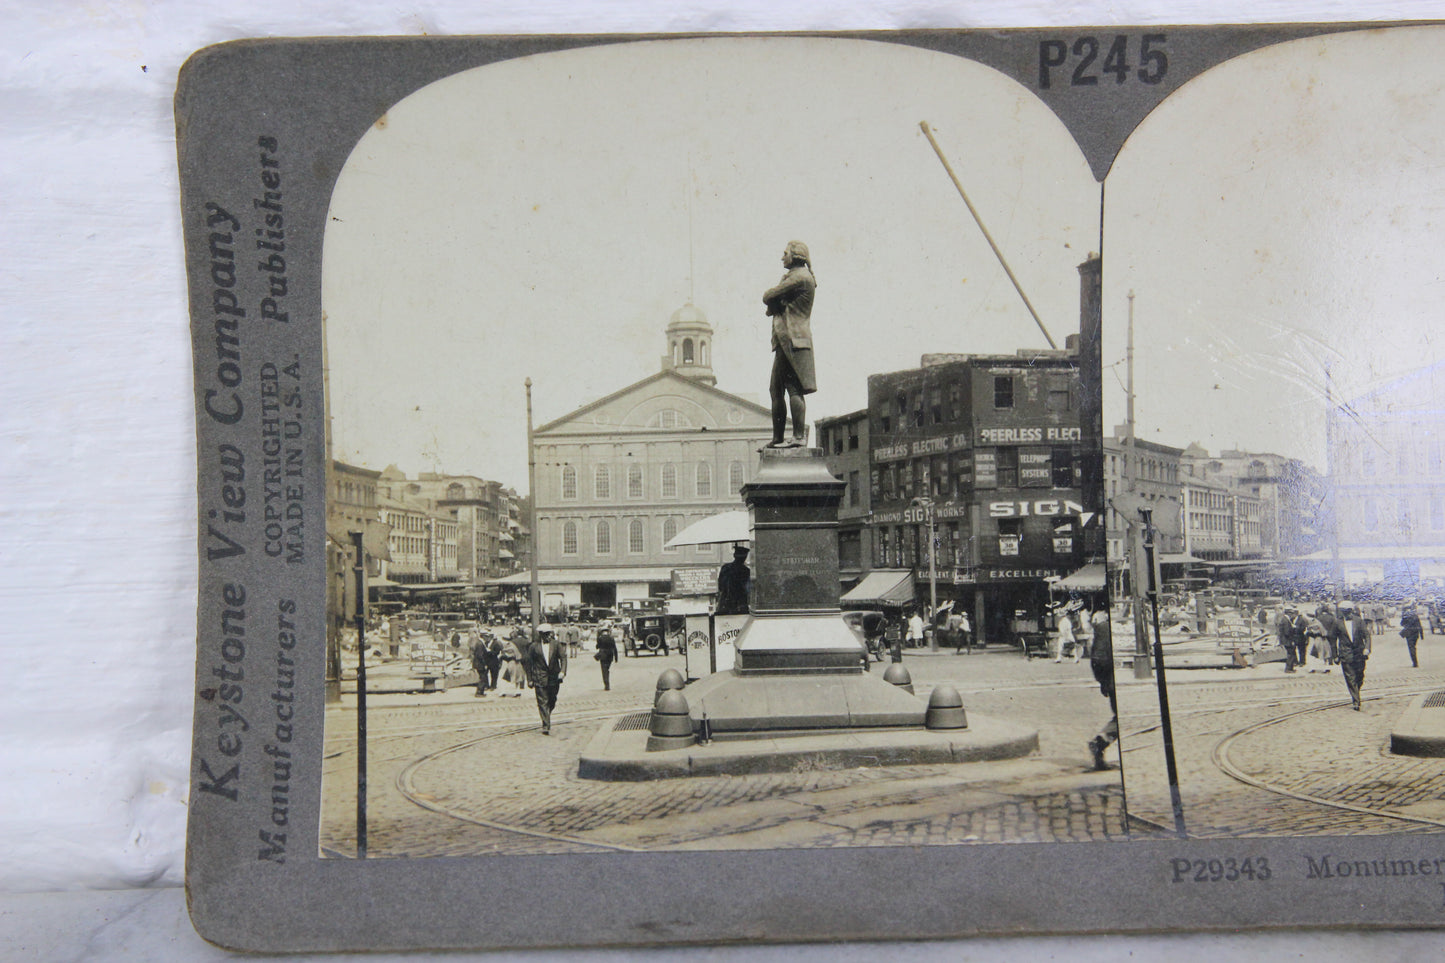 Monument of Samuel Adams and Old Faneuil Hall, Boston, Mass. - Keystone Stereo Card